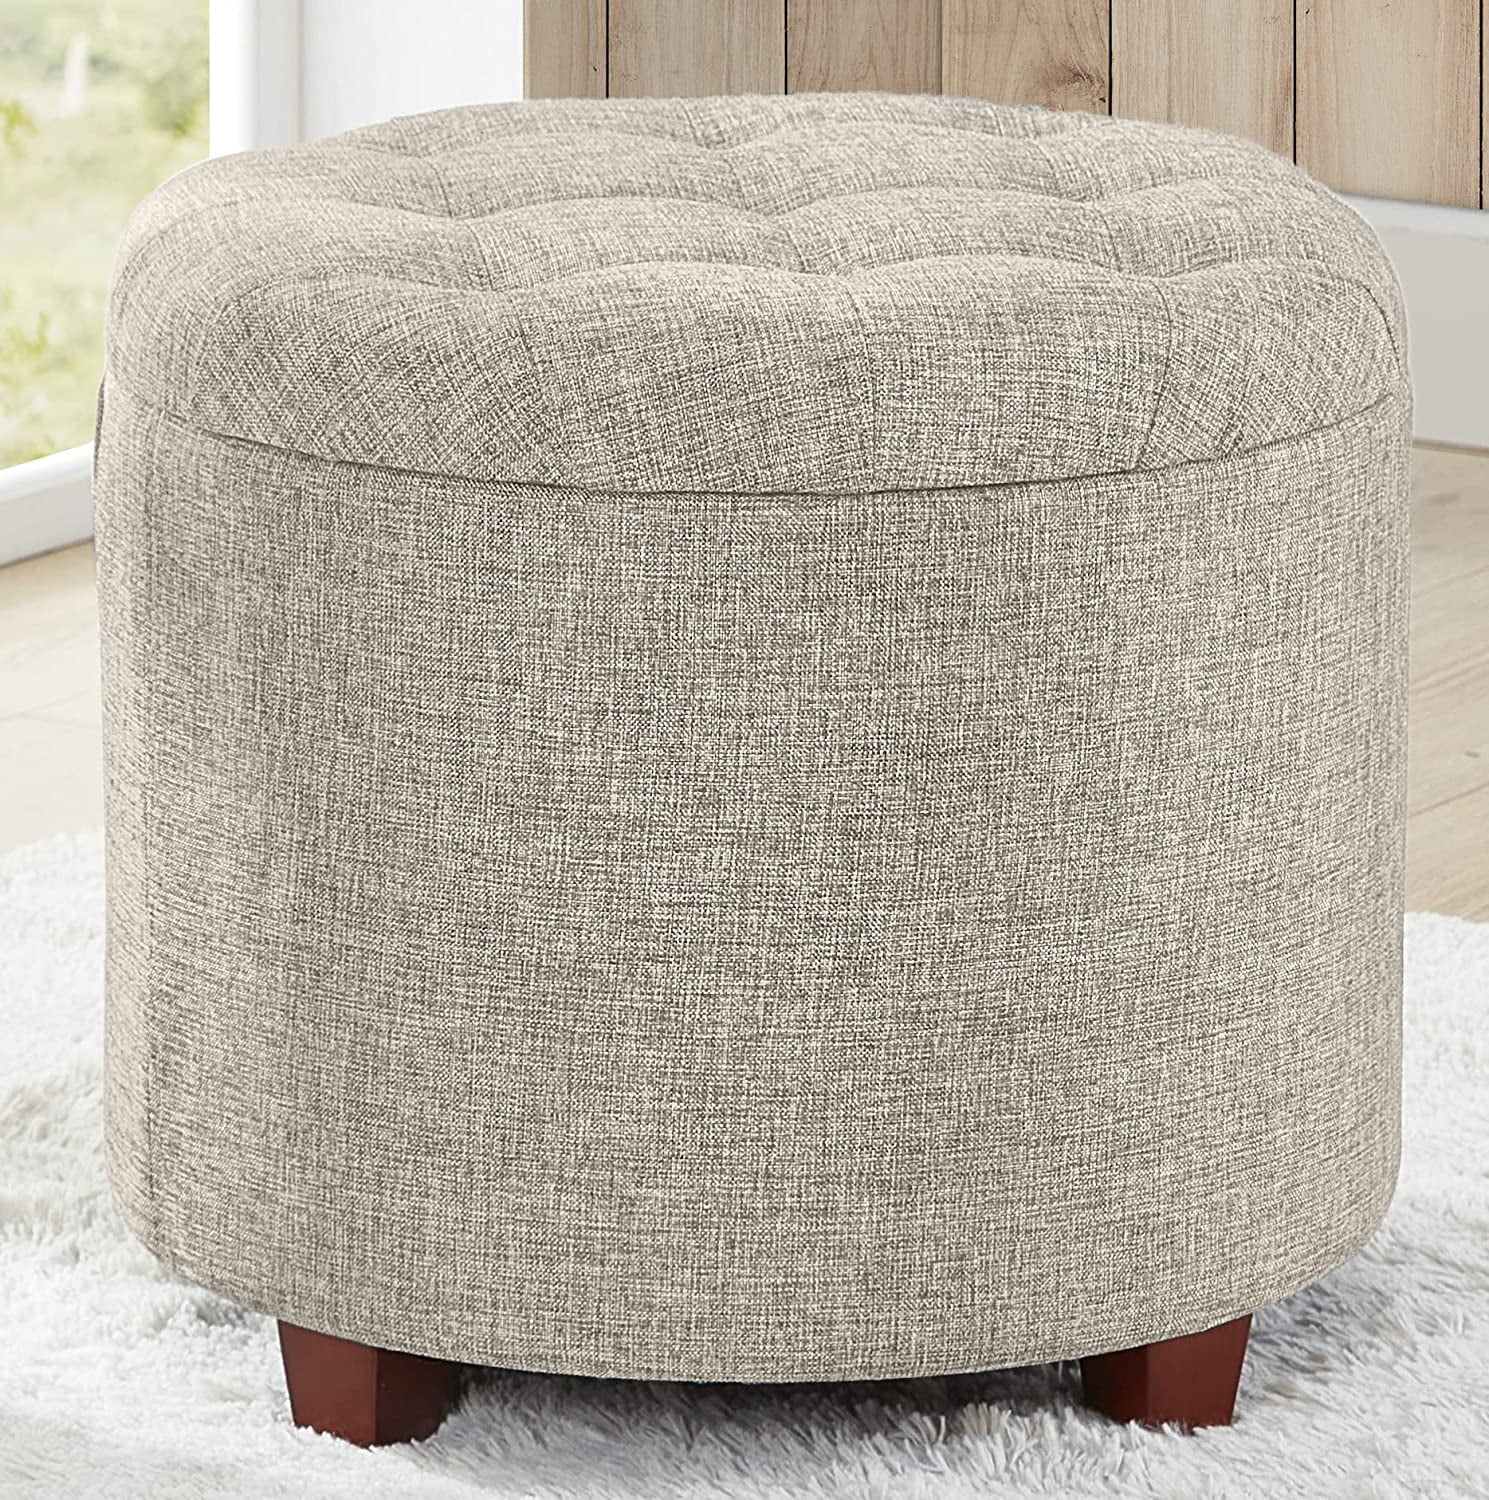 Dark Gray Round Storage Ottoman Foot Rest Upholstered Pleated Round  Footstool for Living Room LM-W48735178 - The Home Depot